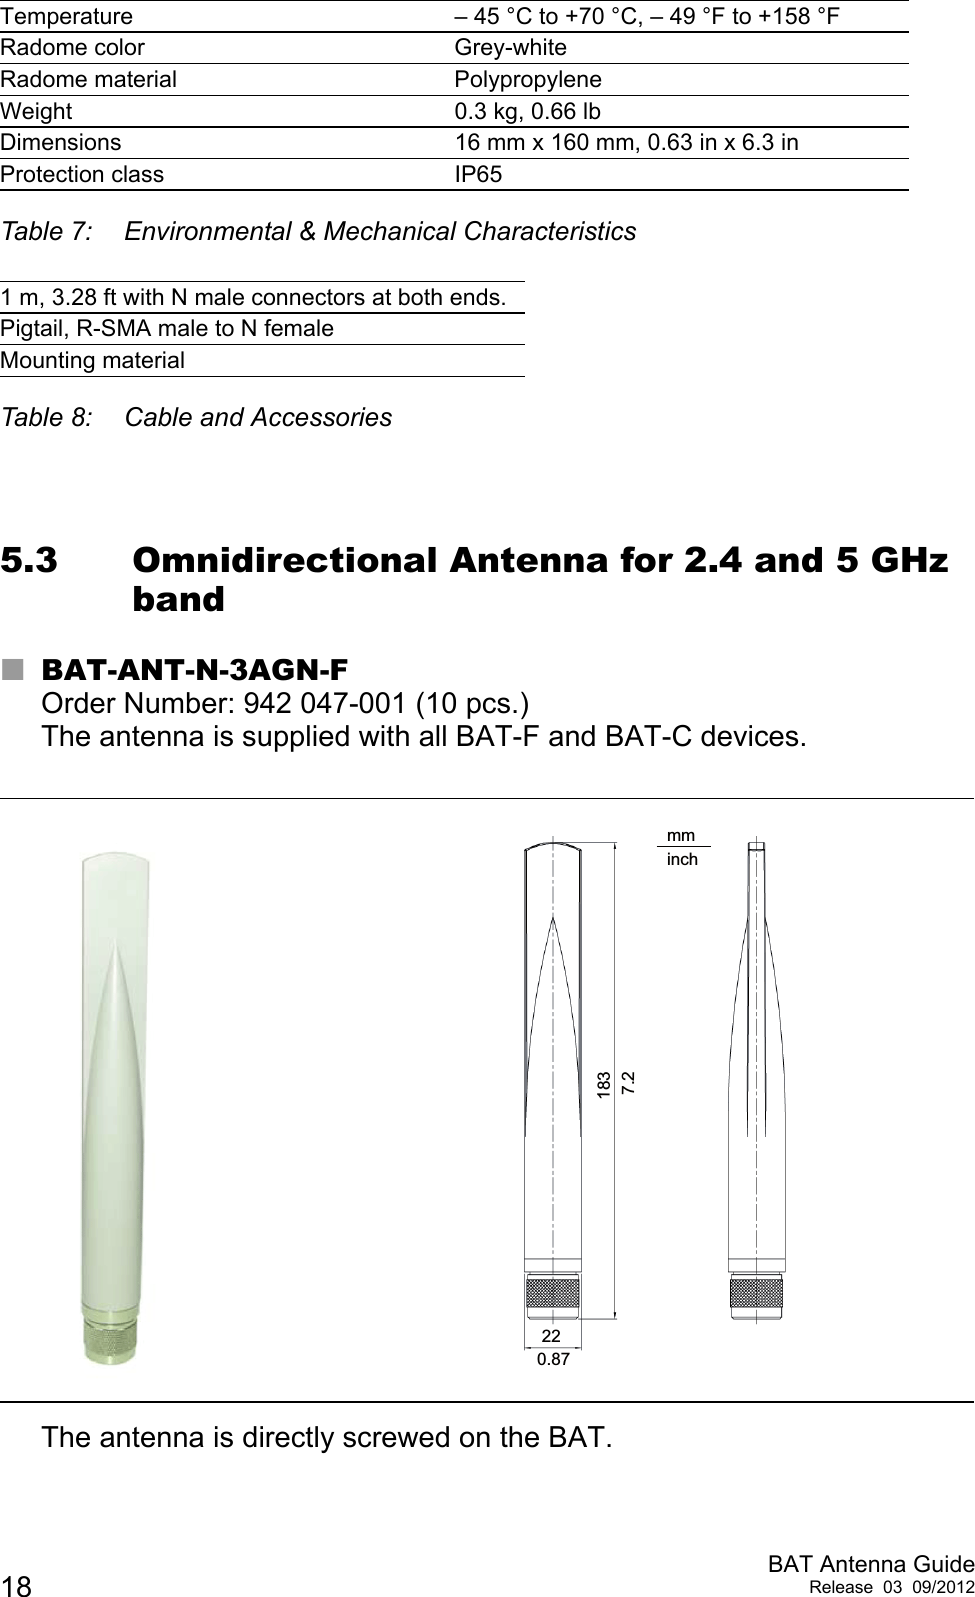 18 BAT Antenna GuideRelease 03 09/20125.3 Omnidirectional Antenna for 2.4 and 5 GHz bandBAT-ANT-N-3AGN-FOrder Number: 942 047-001 (10 pcs.)The antenna is supplied with all BAT-F and BAT-C devices.The antenna is directly screwed on the BAT. Temperature  – 45 °C to +70 °C, – 49 °F to +158 °FRadome color  Grey-whiteRadome material  PolypropyleneWeight  0.3 kg, 0.66 lbDimensions  16 mm x 160 mm, 0.63 in x 6.3 inProtection class IP65Table 7: Environmental &amp; Mechanical Characteristics1 m, 3.28 ft with N male connectors at both ends.Pigtail, R-SMA male to N femaleMounting materialTable 8: Cable and Accessories7.20.87mminch18322